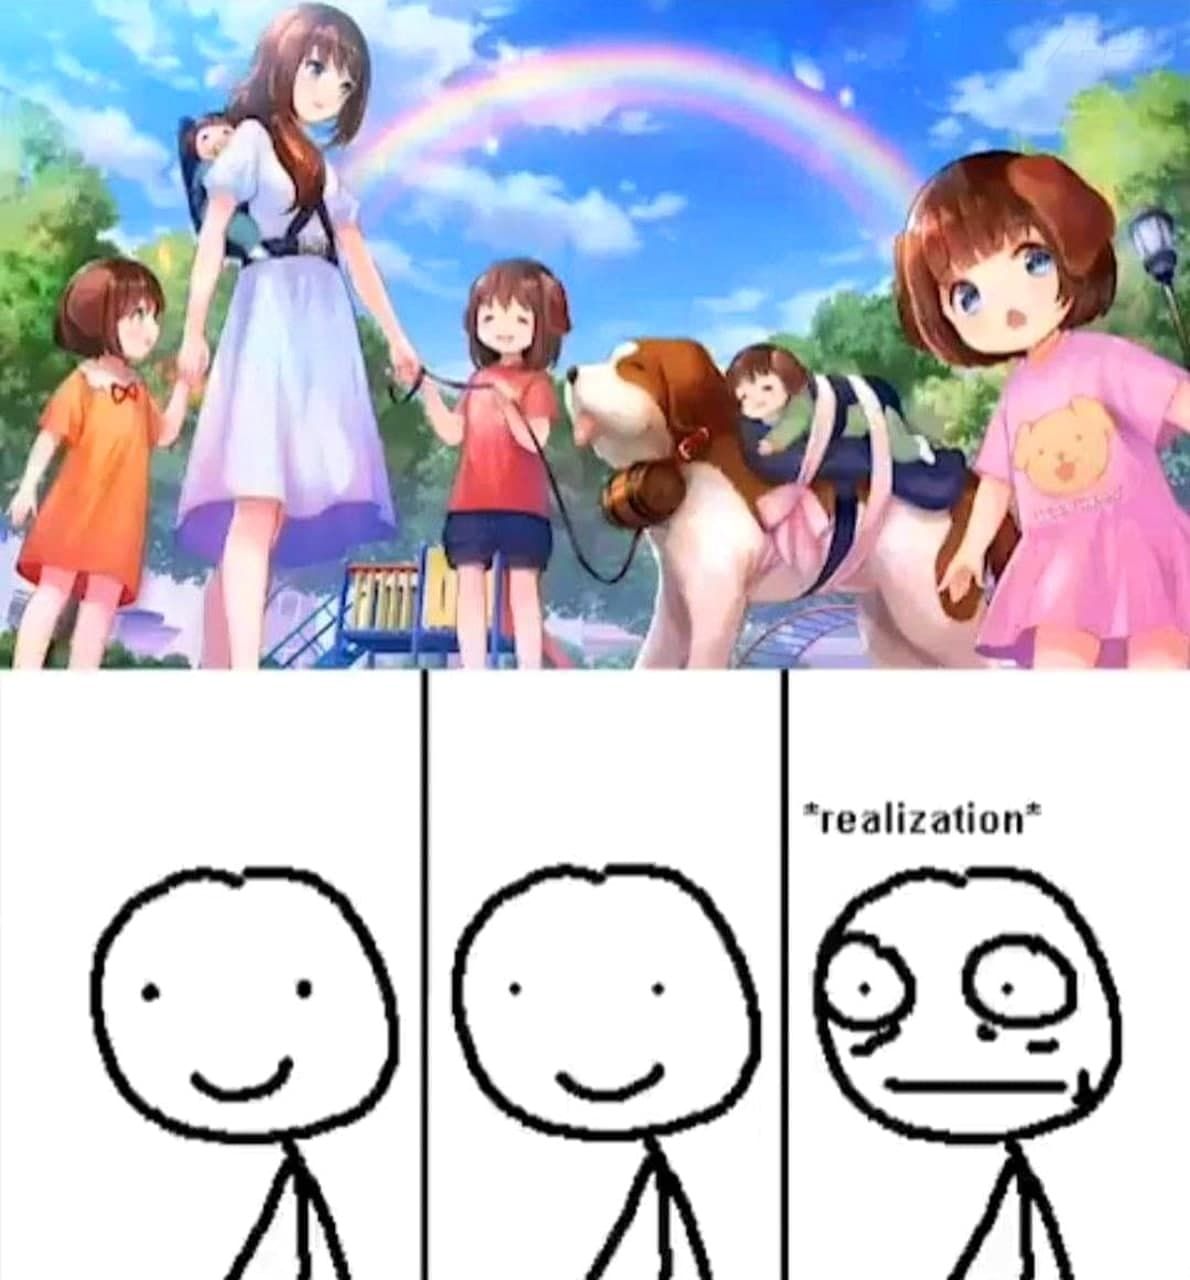 What a cute anime, but...